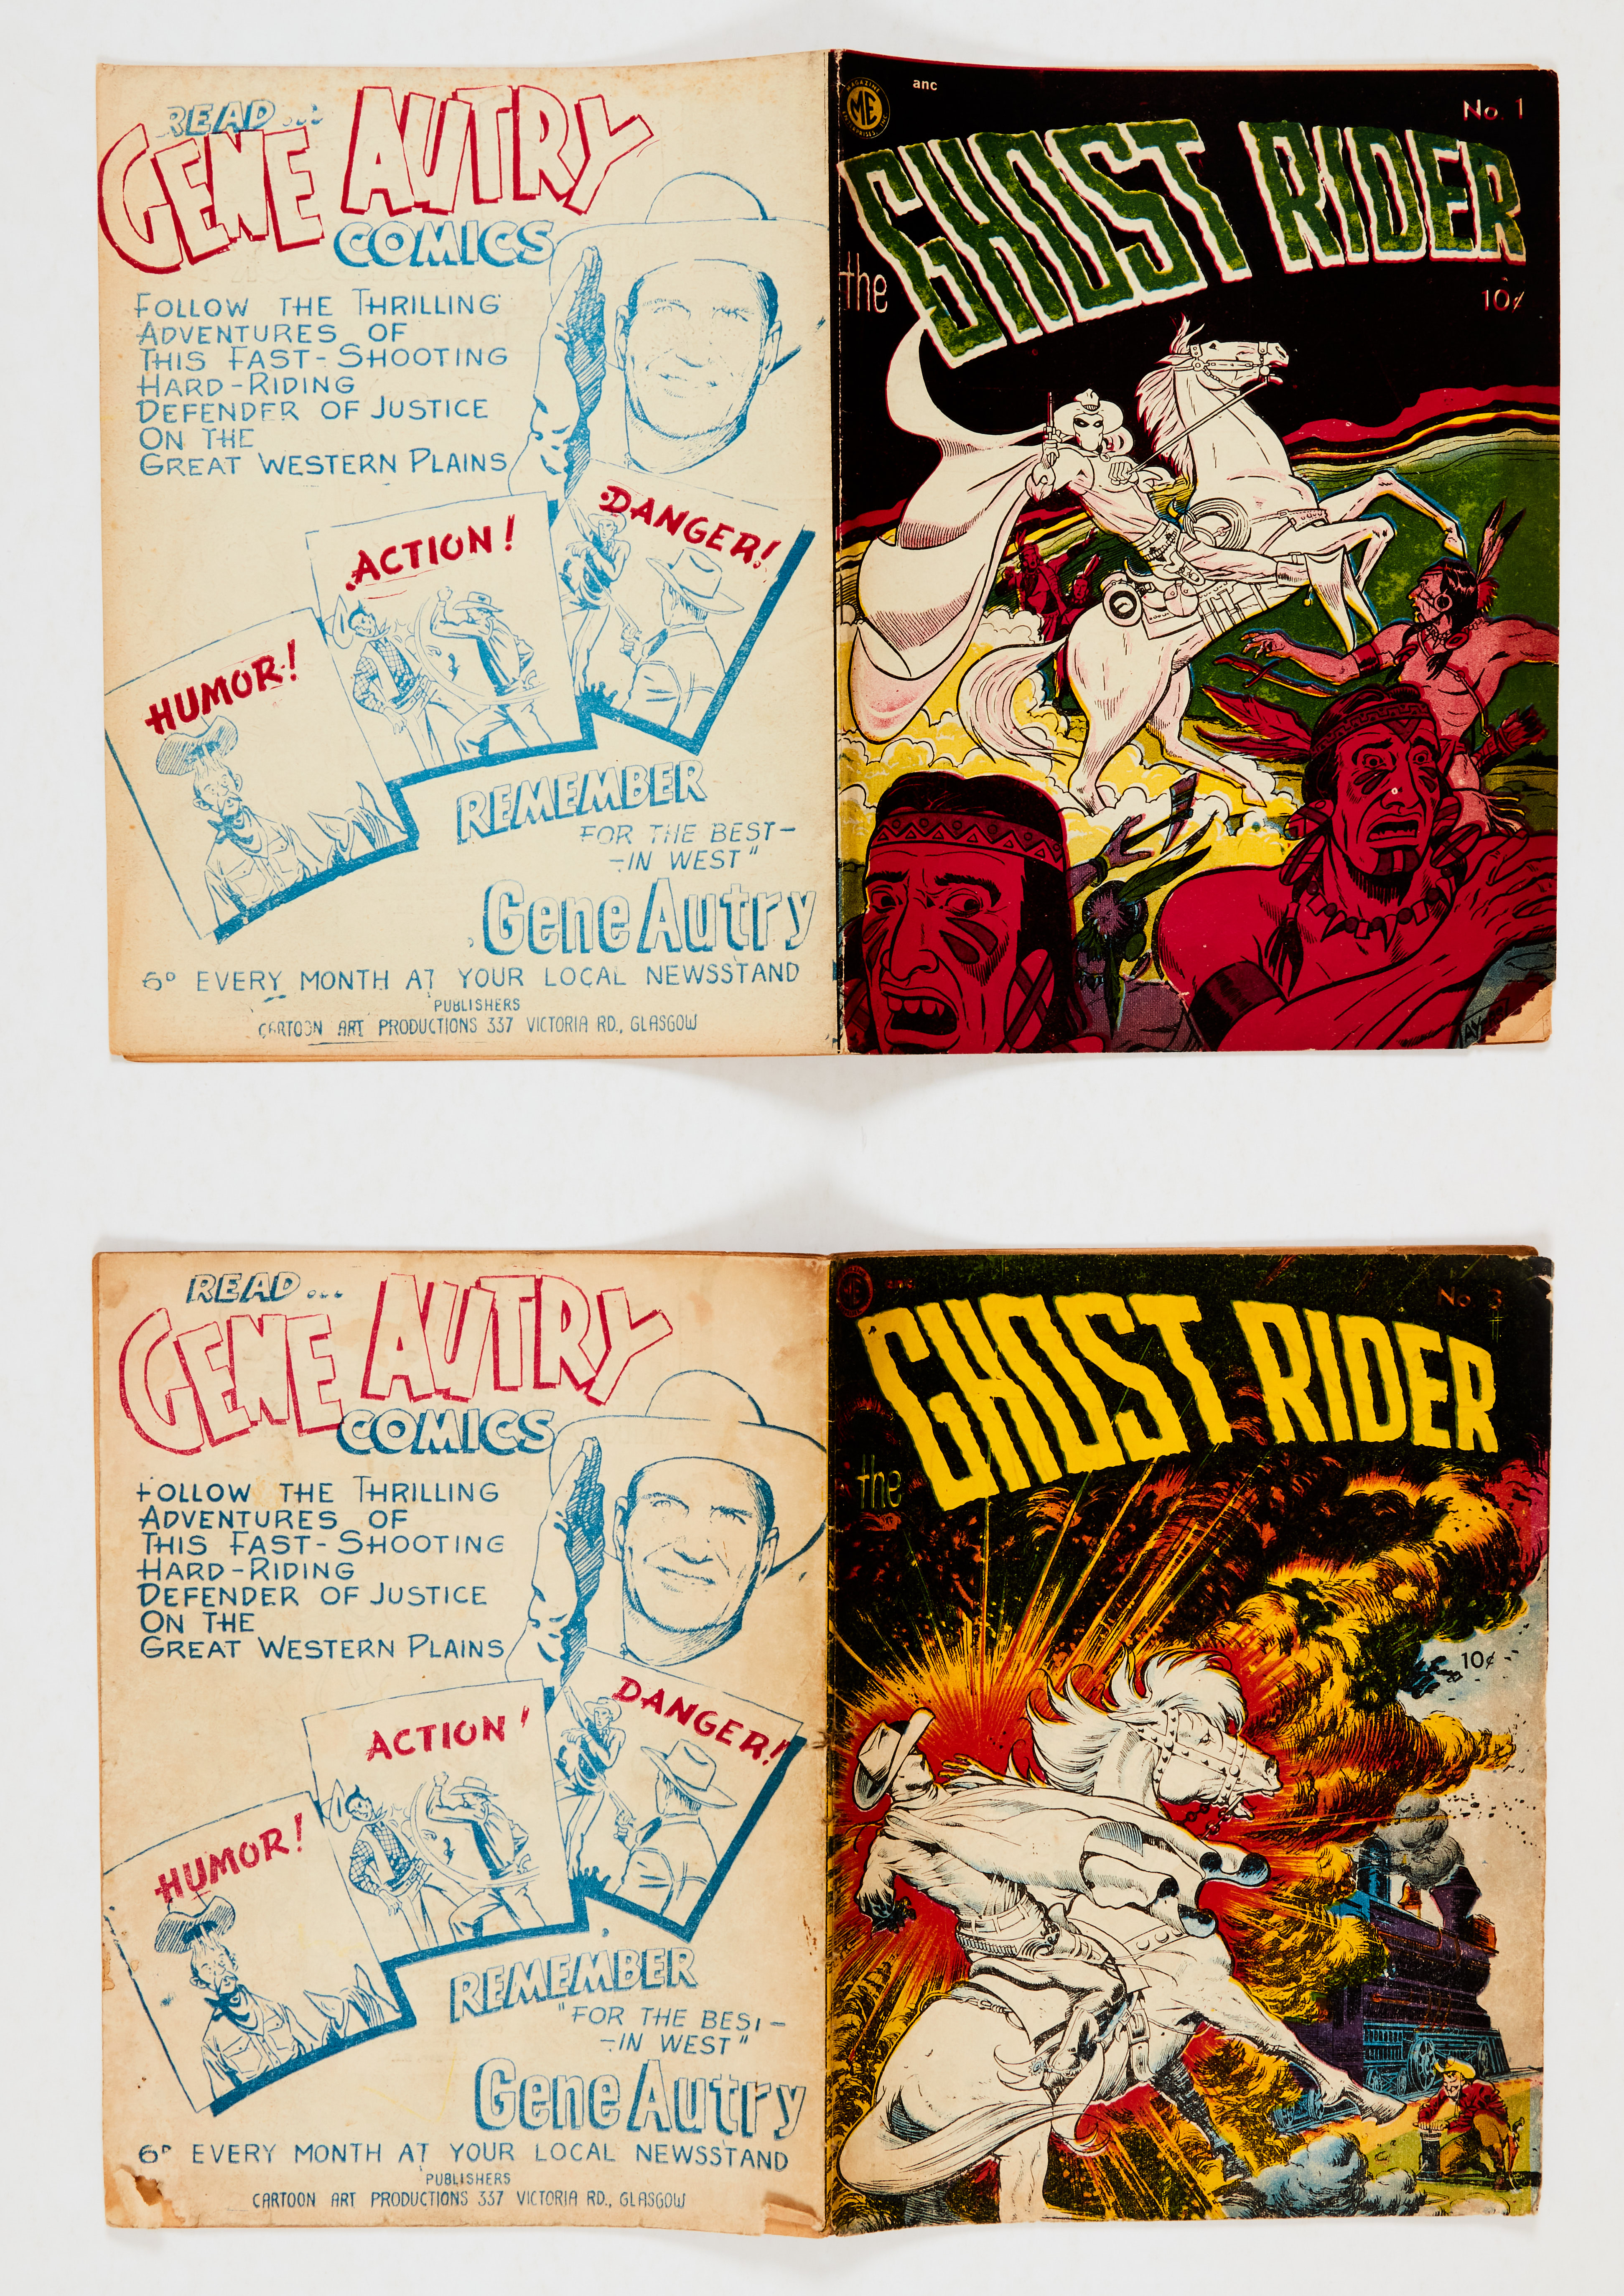 Ghost Rider (1952 Cartoon Art, Glasgow) 1, 3. Dick Ayers cover and story art. No 1: lower cover